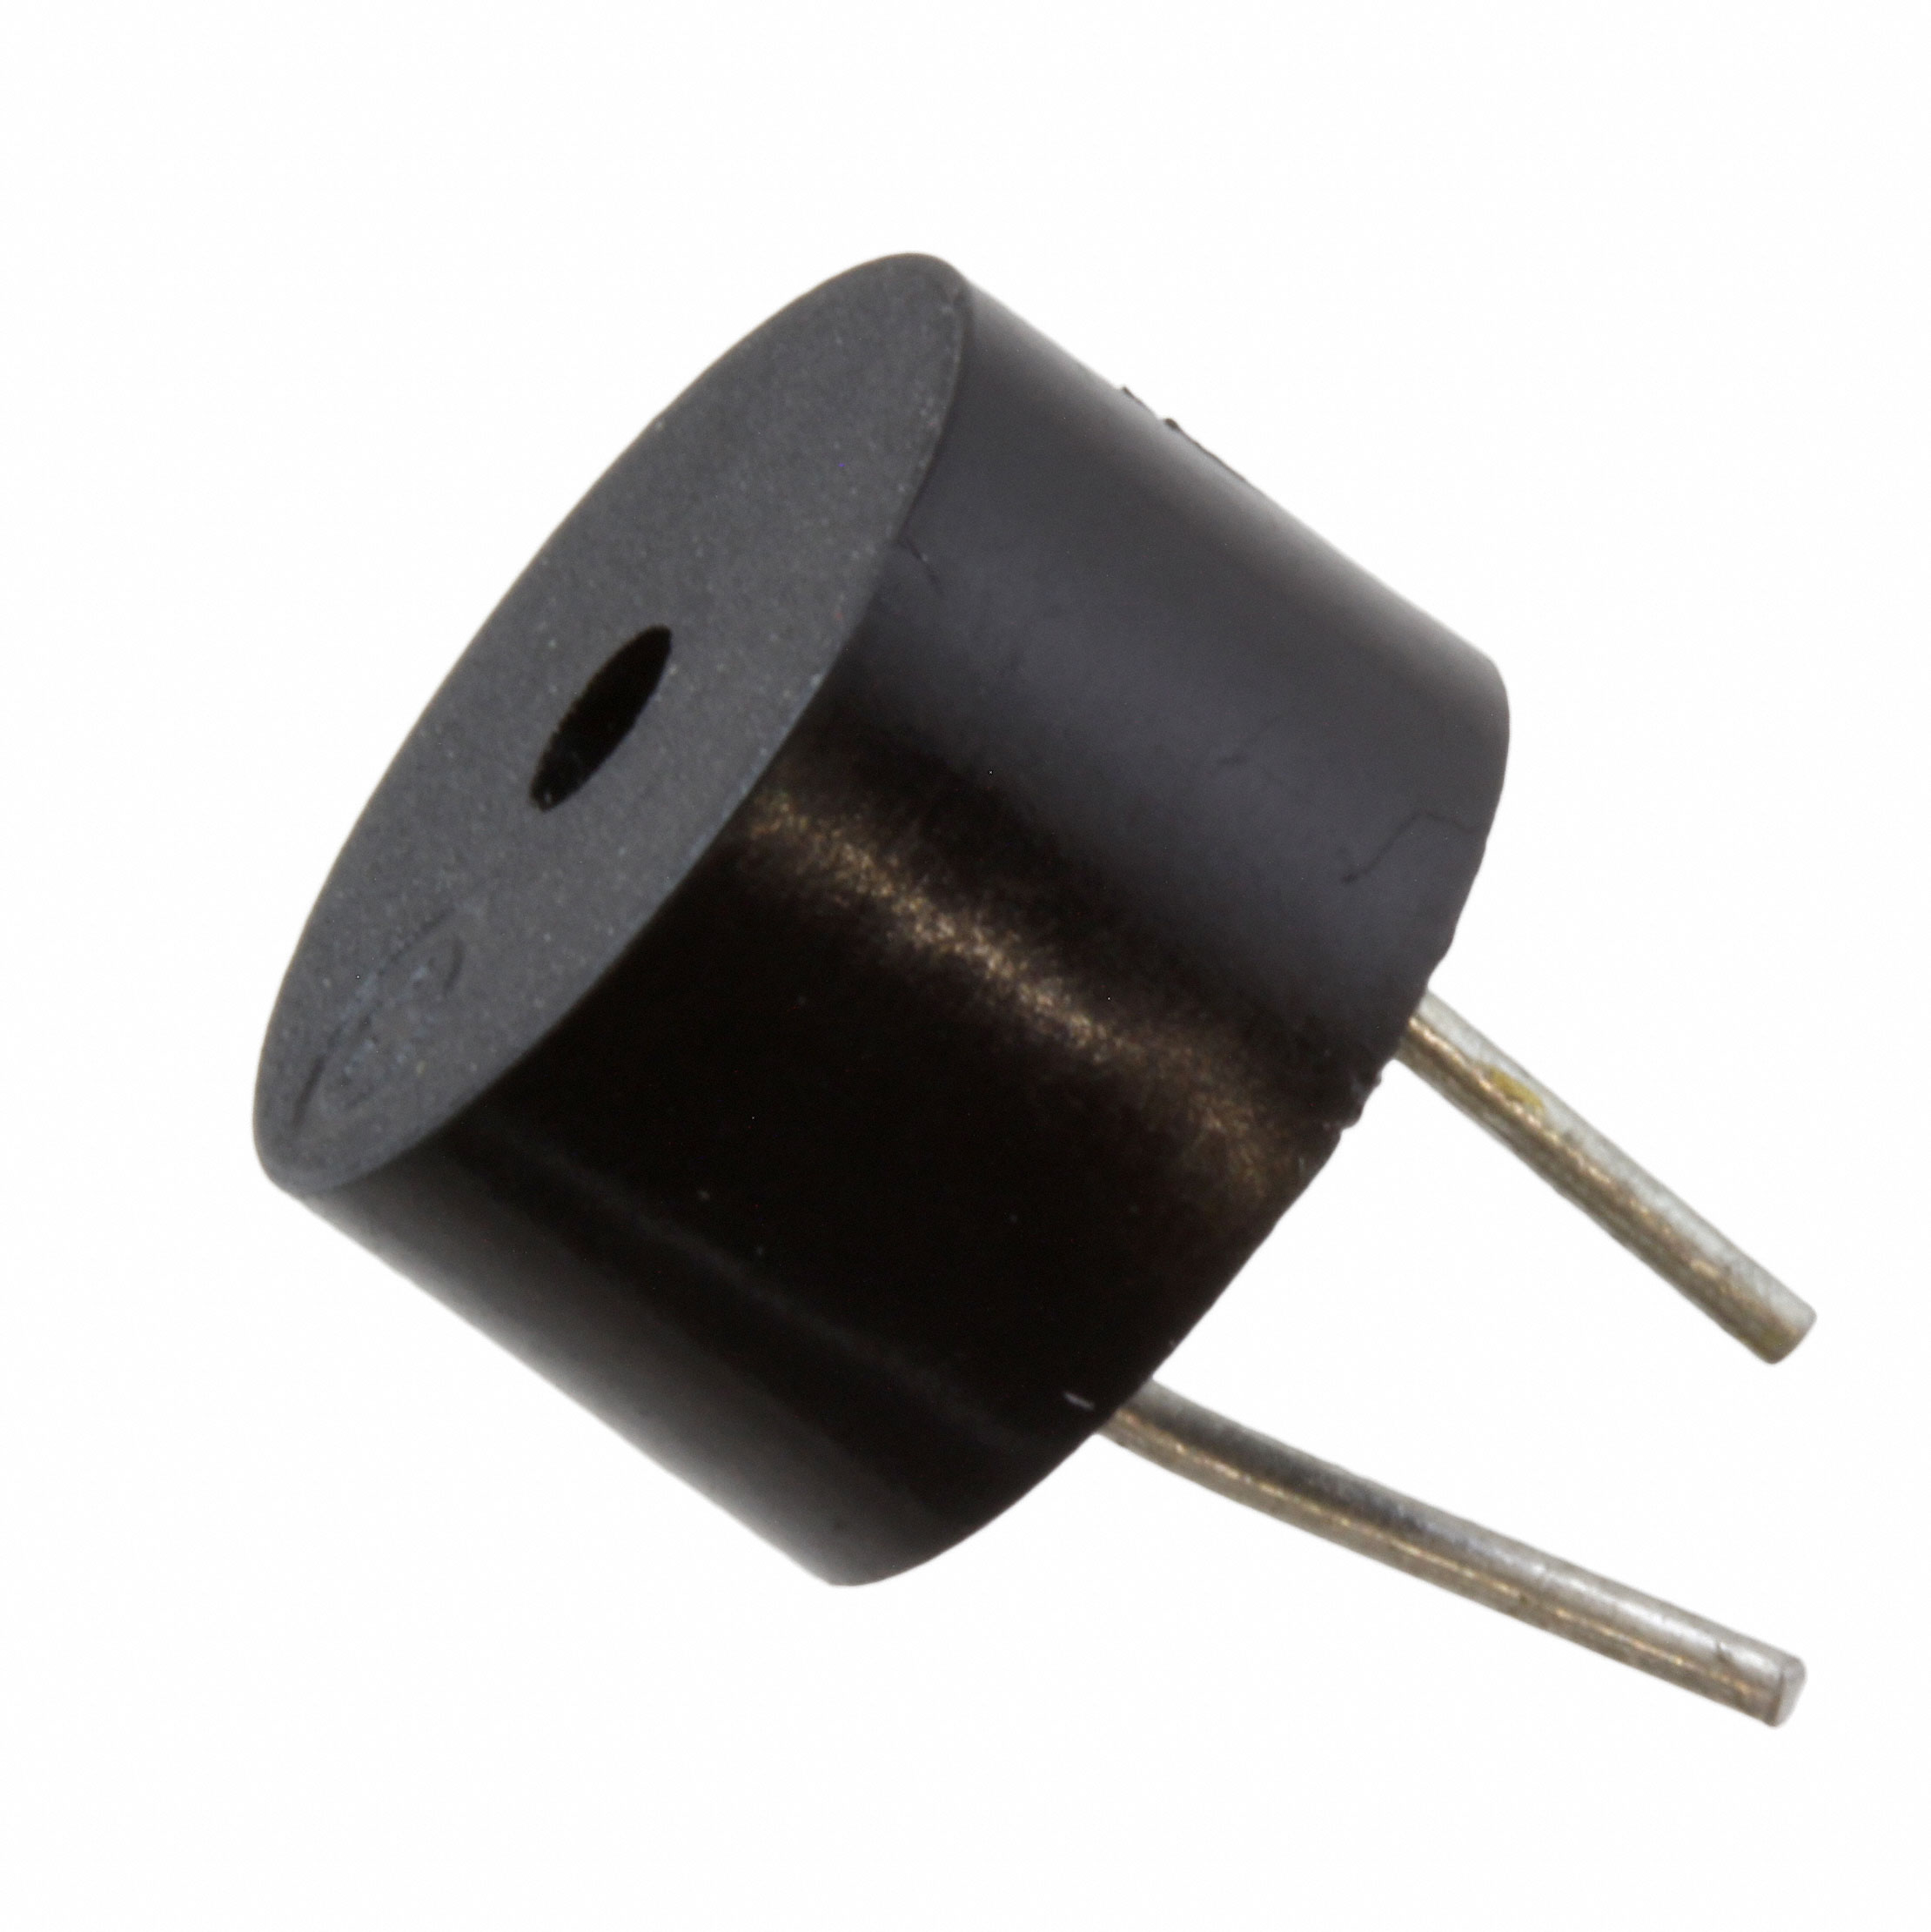 the part number is PB-09N23P-03Q